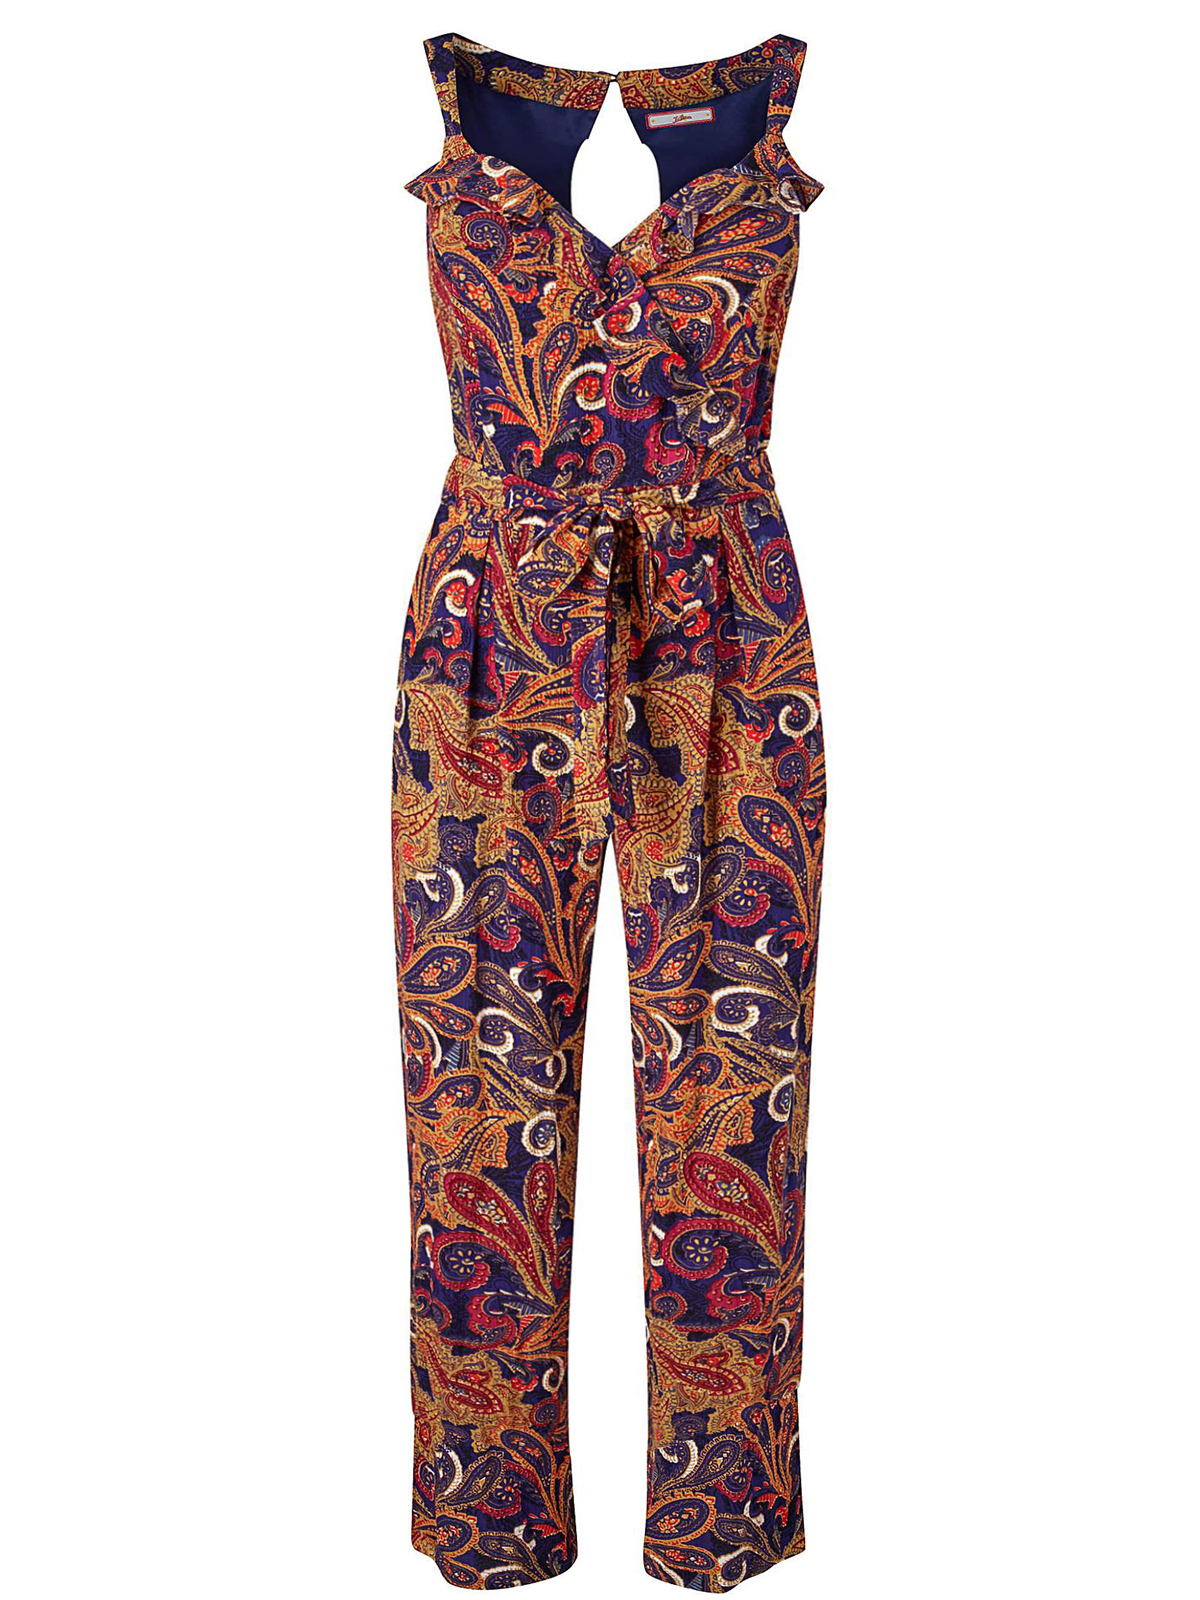 Blue/White Joe Browns Women's Jumpsuit Multicoloured BNWT-Size 12 or 14 or 16